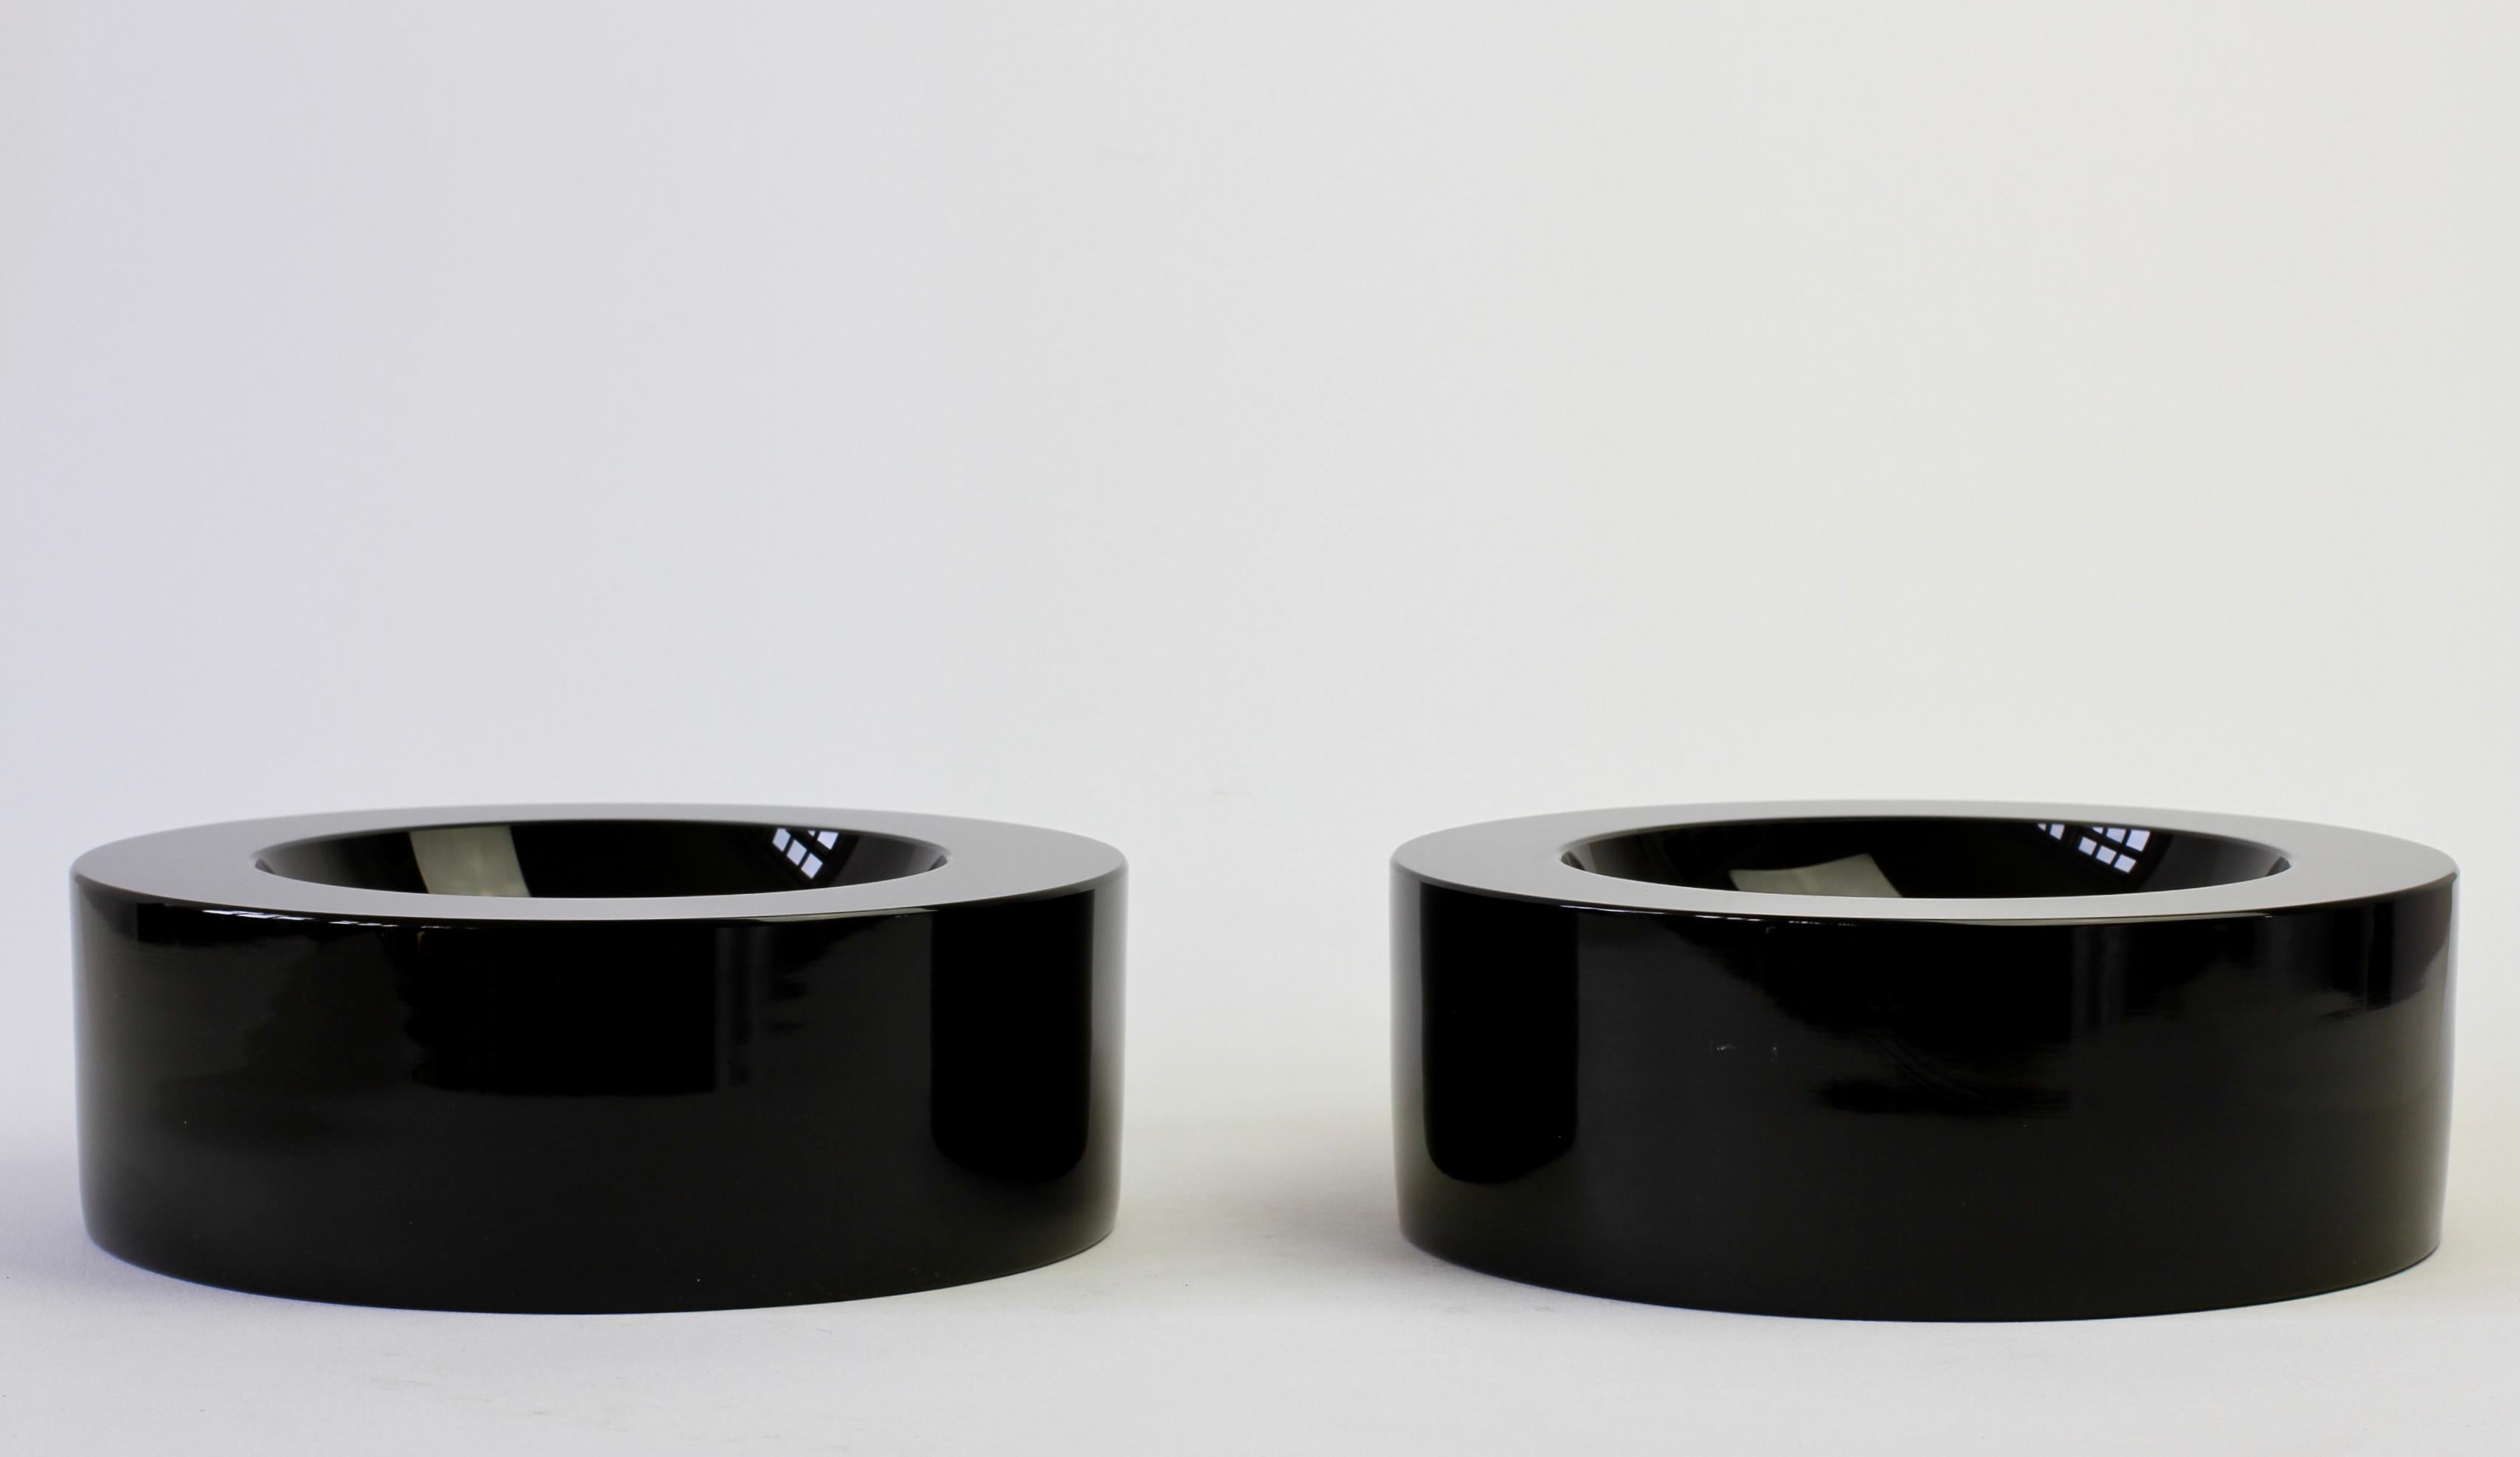 Karl Springer style pair of black colored / coloured heavy and thick round glass bowls, dishes or ashtrays by Seguso Vetri d'Arte Murano, Italy, circa 1980s. We have attributed the design to Mario Pinzoni. Elegant minimalist circular form and thick